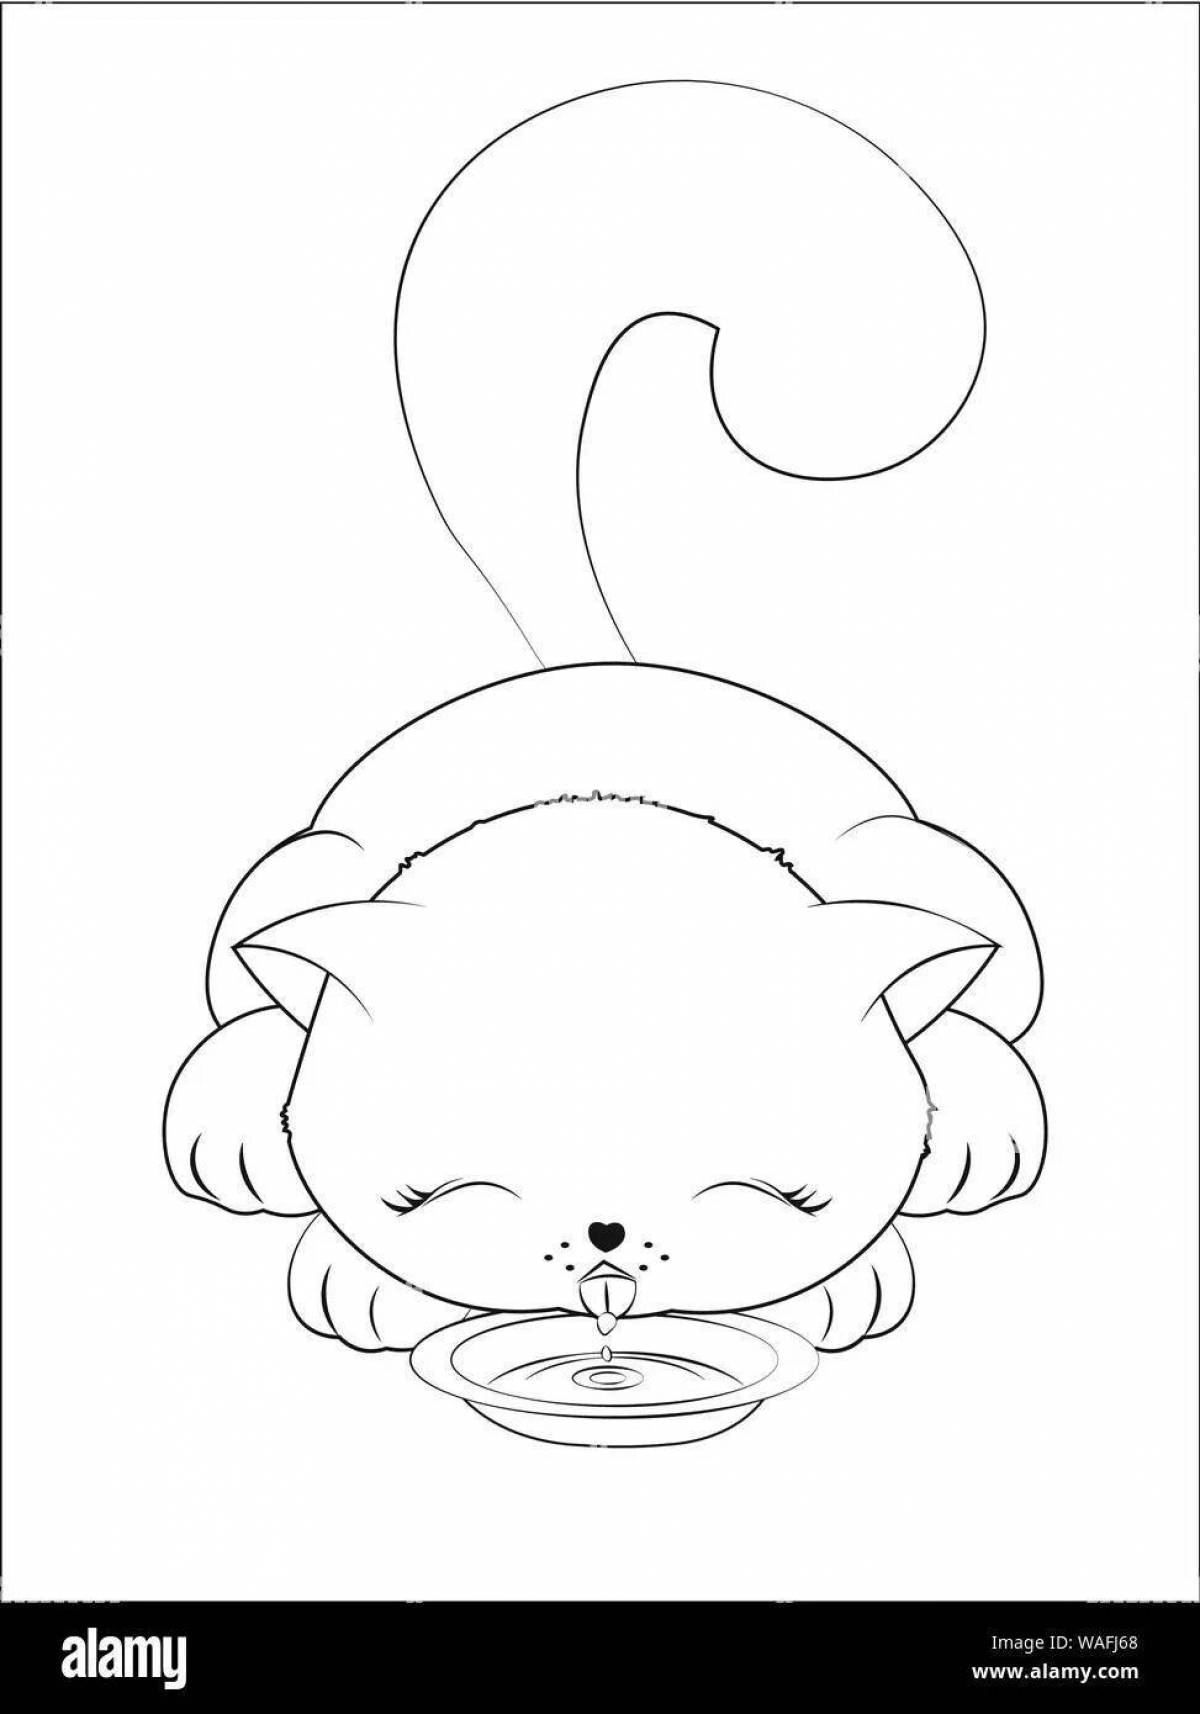 Coloring page impatient cat drinking milk